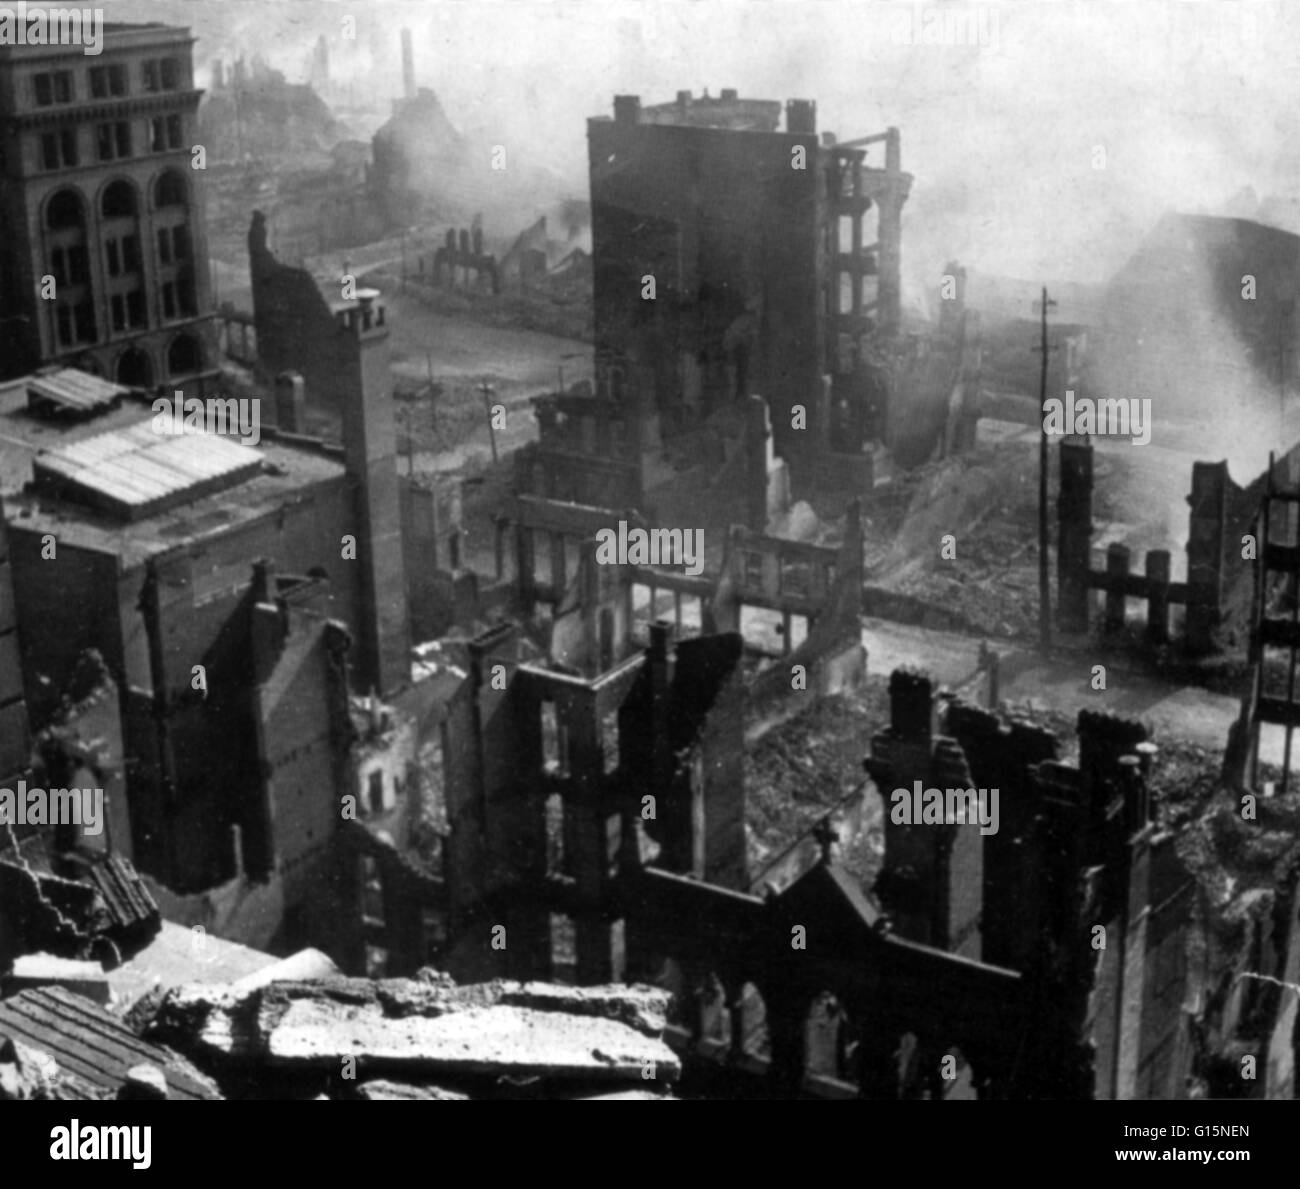 The Great Baltimore Fire raged in Baltimore, Maryland, on Sunday, February 7, and Monday, February 8, 1904. Over 1,200 firefighters were required to bring the blaze under control. It destroyed a major part of central Baltimore with an estimated $85 millio Stock Photo